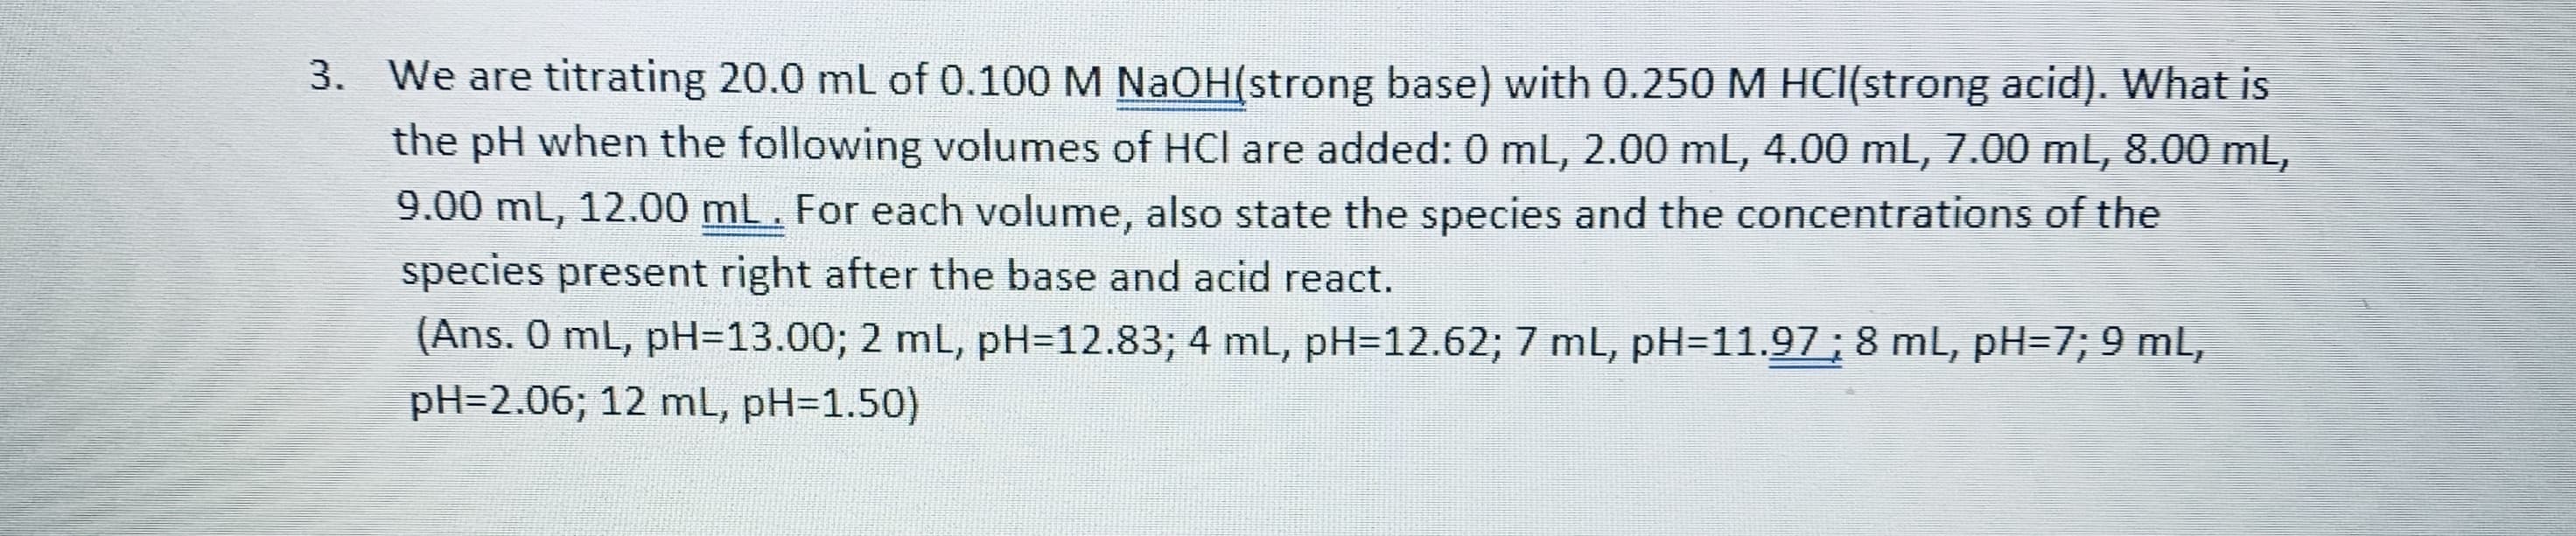 We are titrating 20.0 mL of 0.100 M NaOH(strong base) with 0.250 M HCl(strong acid). What is
the pH when the following volumes of HCI are added: 0 mL, 2.00 mL, 4.00 mL, 7.00 mL, 8.00 mL,
3.
9.00 mL, 12.00 mL. For each volume, also state the species and the concentrations of the
species present right after the base and acid react.
(Ans. 0 mL, pH=13.00; 2 mL, pH-12.83; 4 mL, pH-12.62; 7 mL, pH-11.97 8 mL, pH-7; 9 mL,
pH-2.06; 12 mL, pH-1.50)
